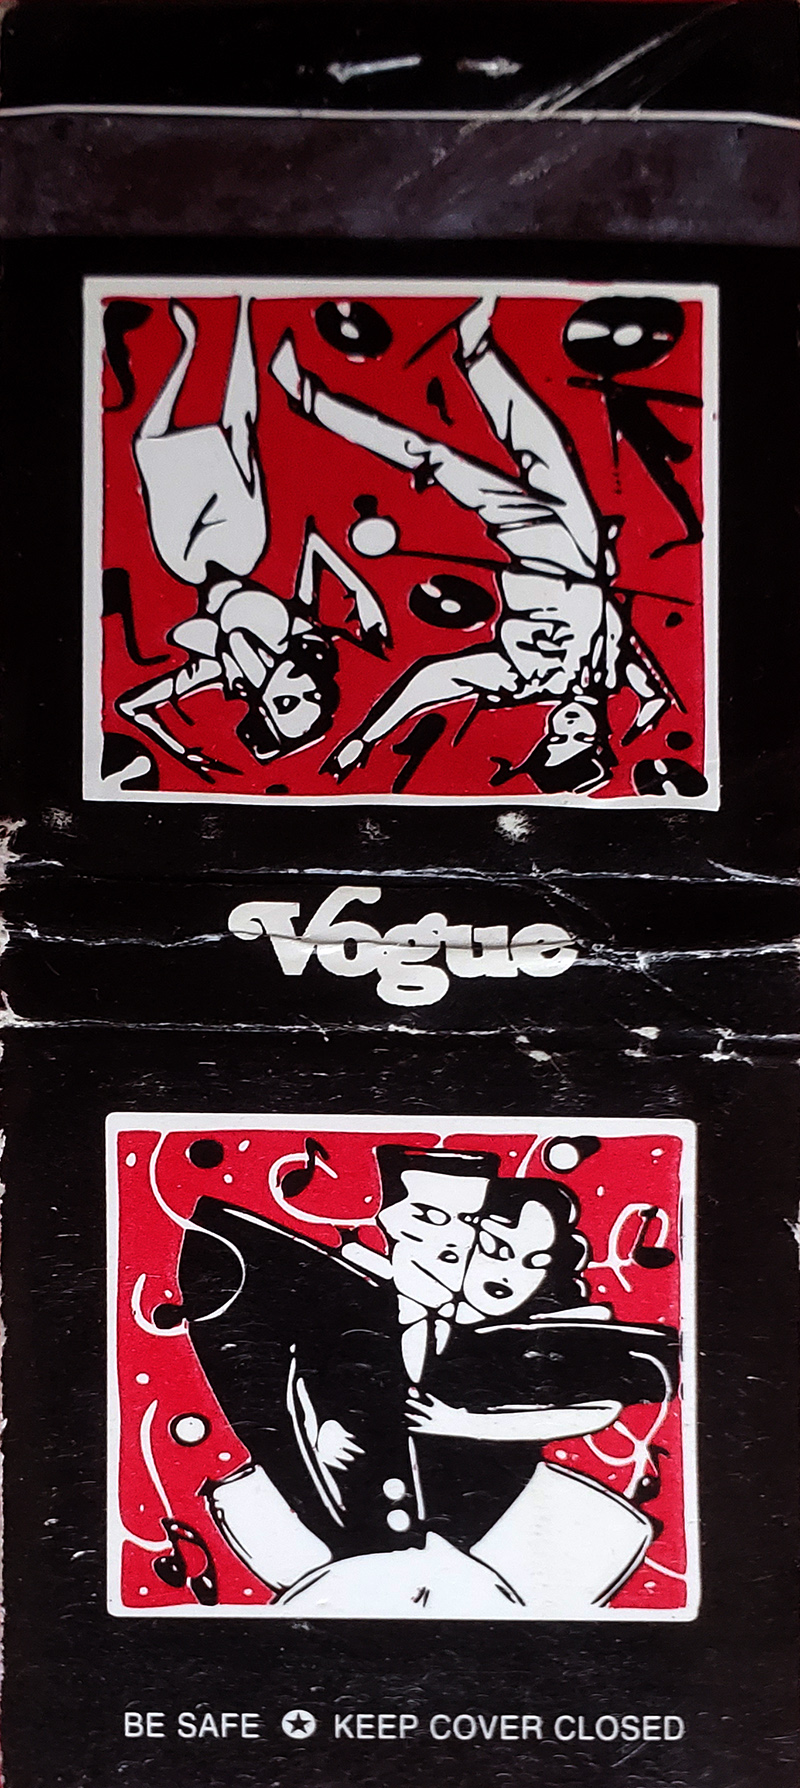 matchbook from the Vogue Nightclub